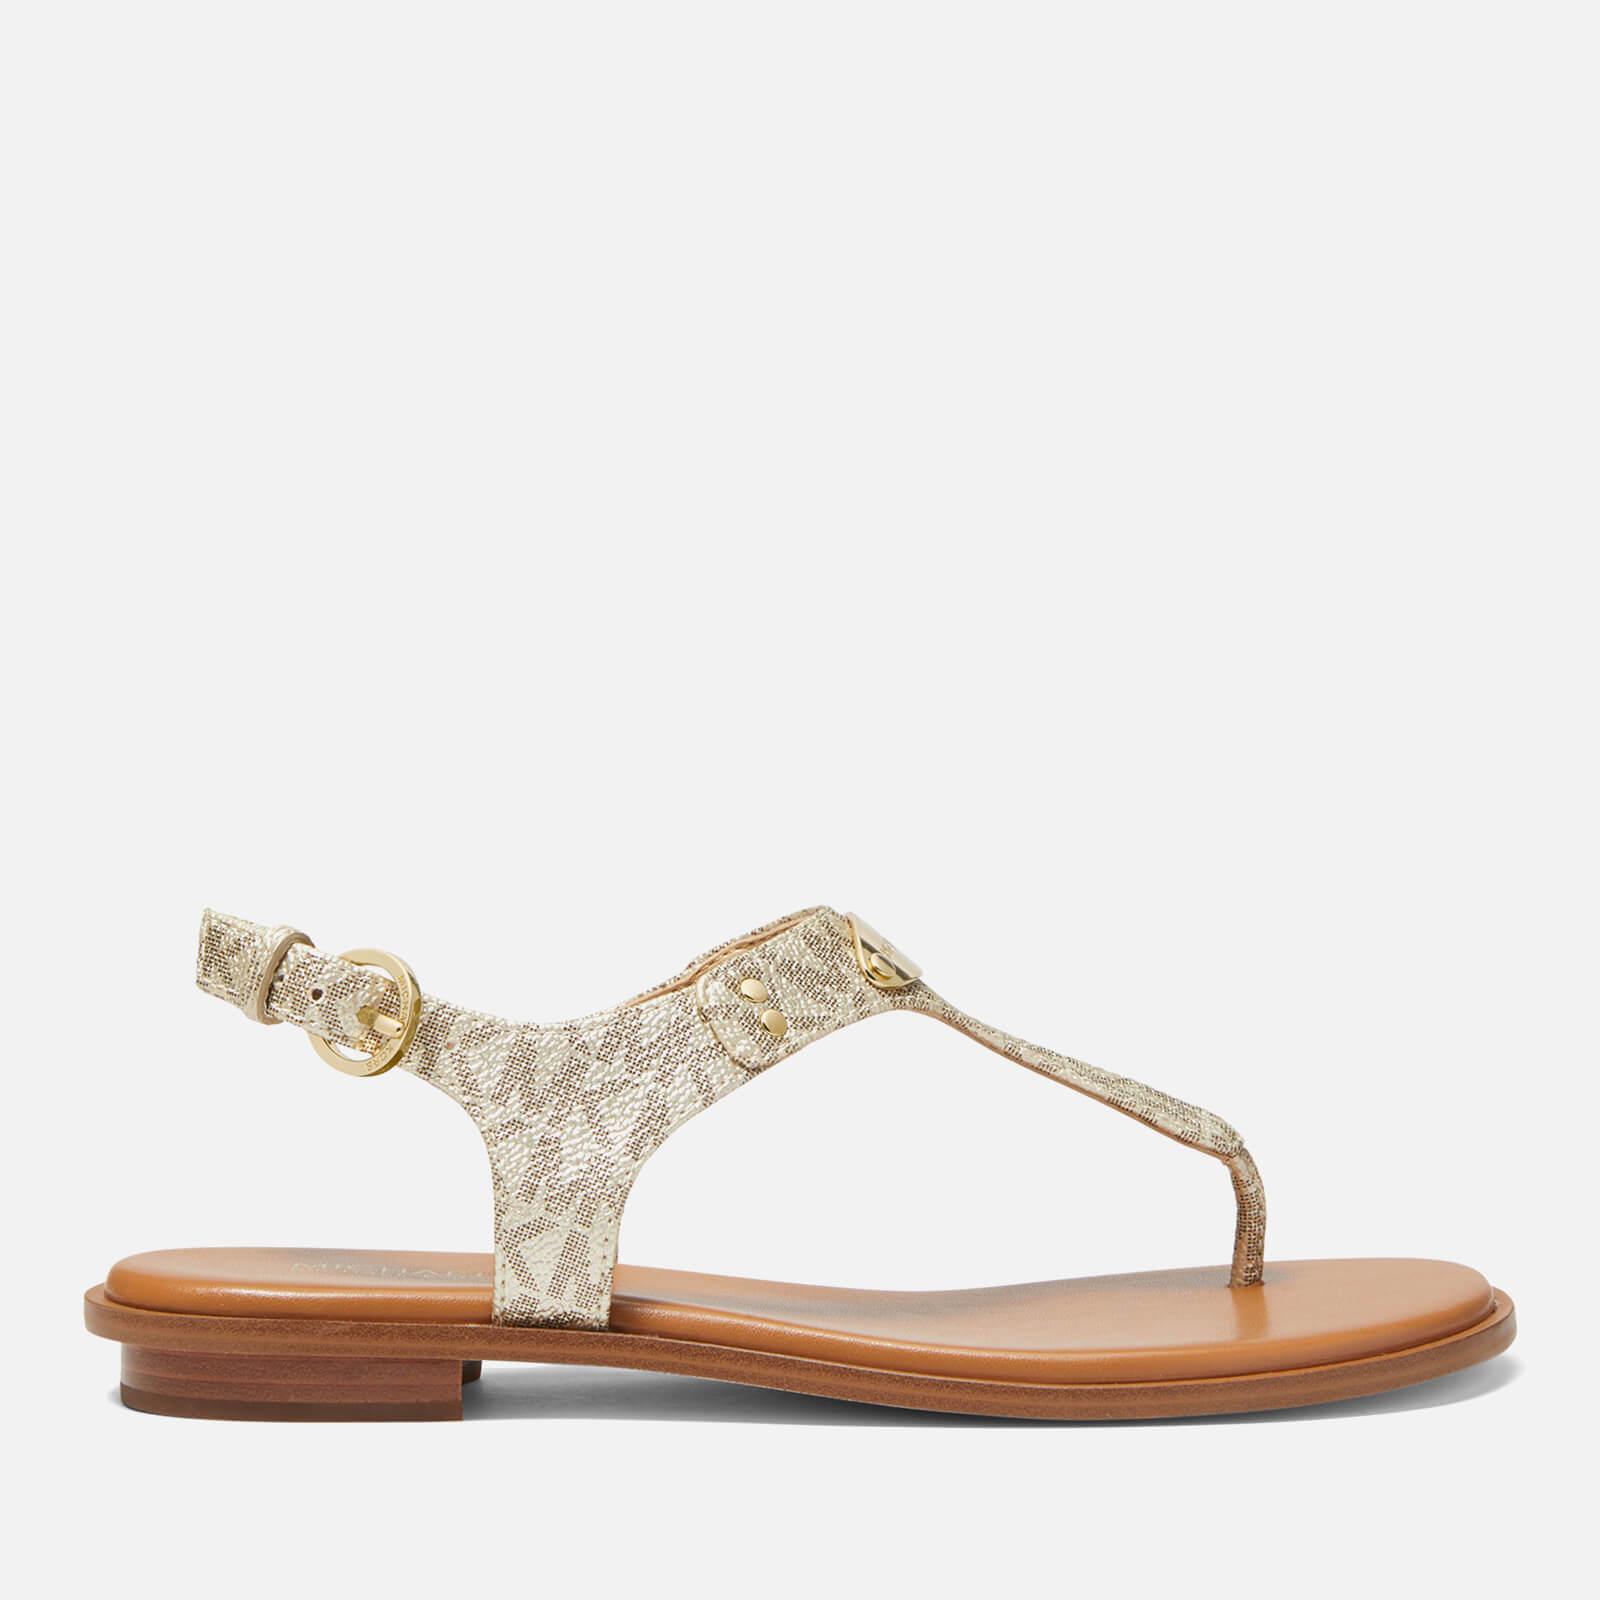 MICHAEL Michael Kors Mallory Toe Post Leather Sandals in White | Lyst